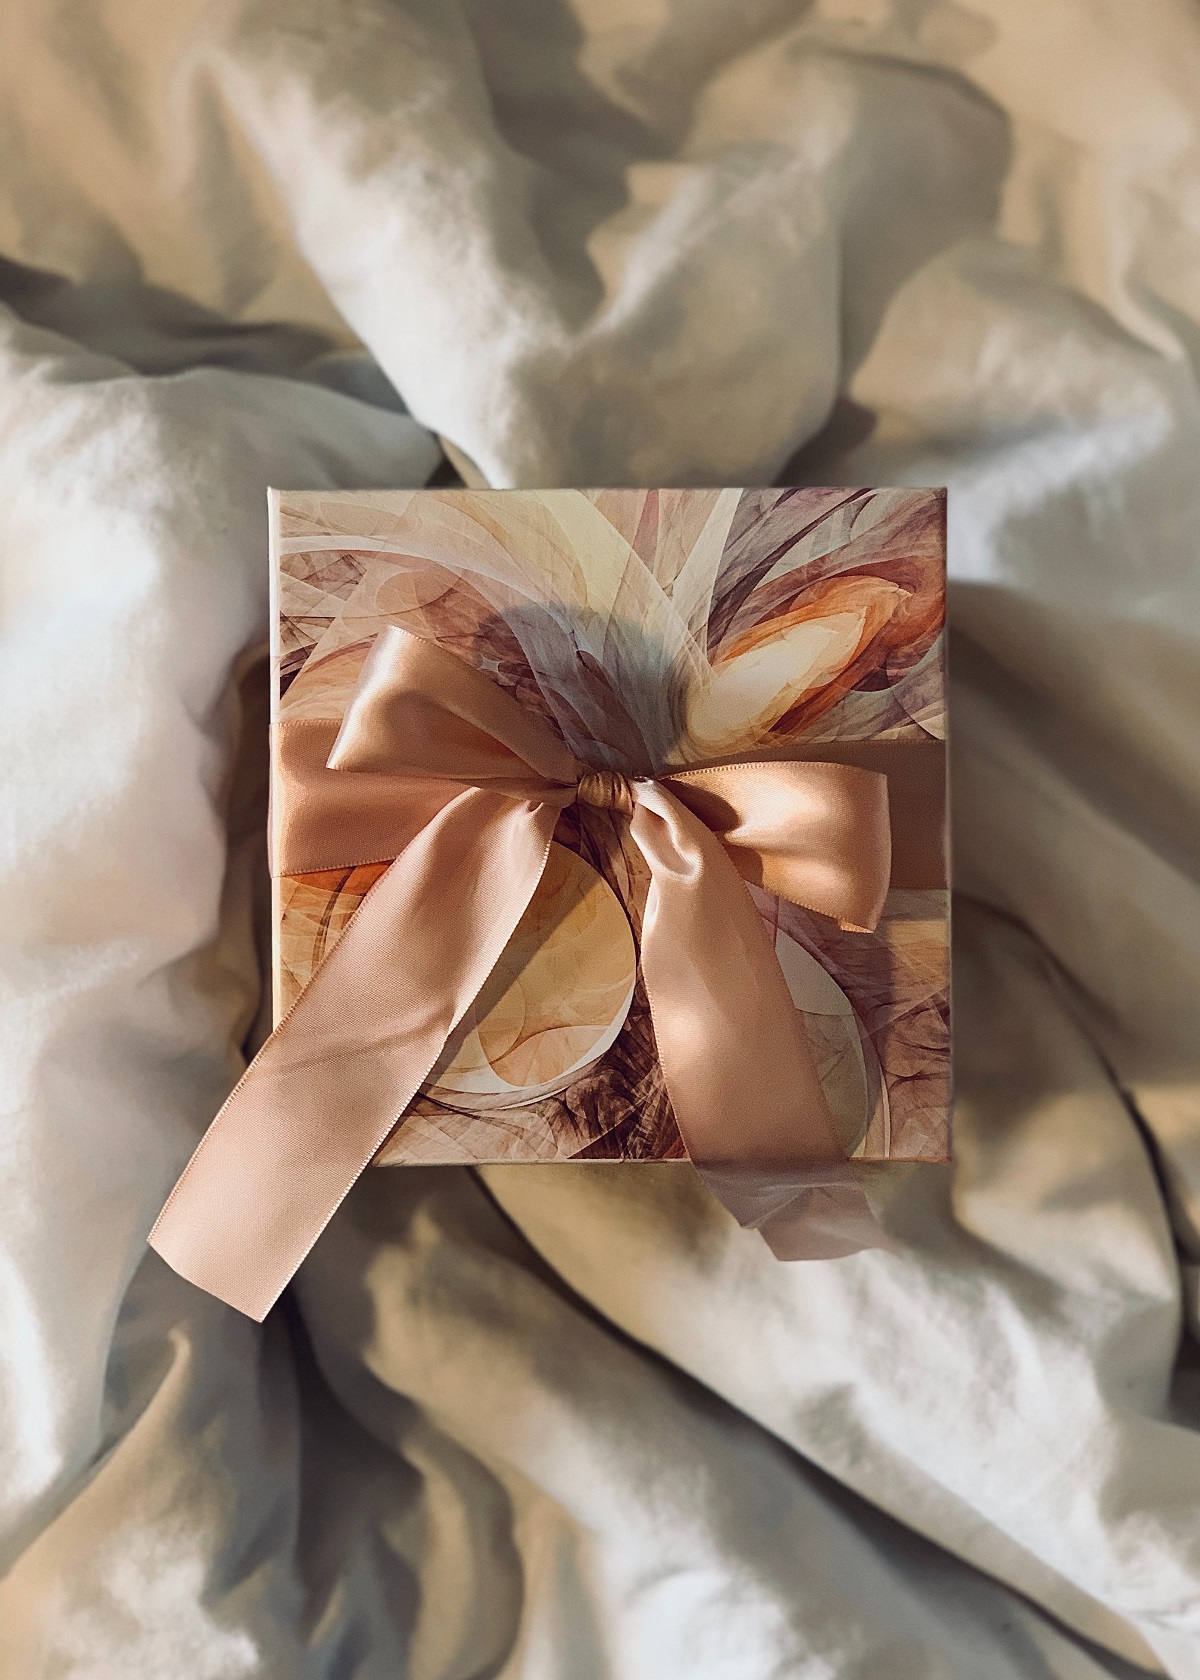 A beautifully wrapped gift box adorned with a colorful ribbon and bow, symbolizing the art of thoughtful gifting